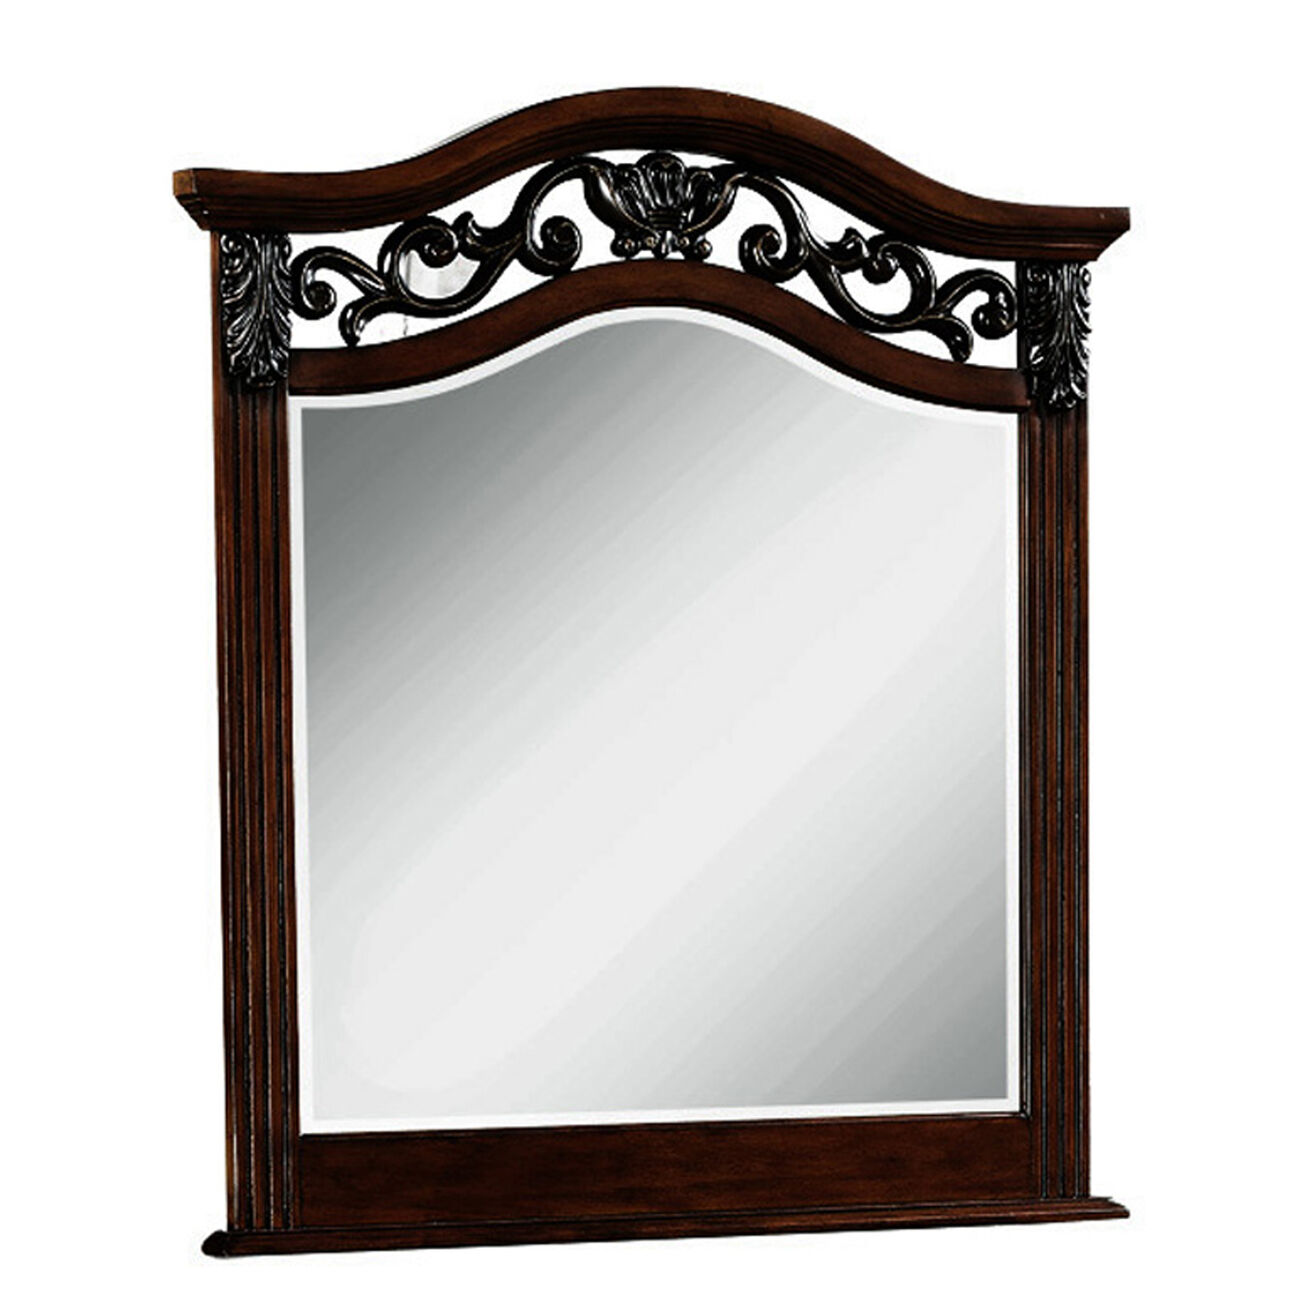 Wooden Mirror with Scalloped Top and Scrollwork Details, Dark Brown